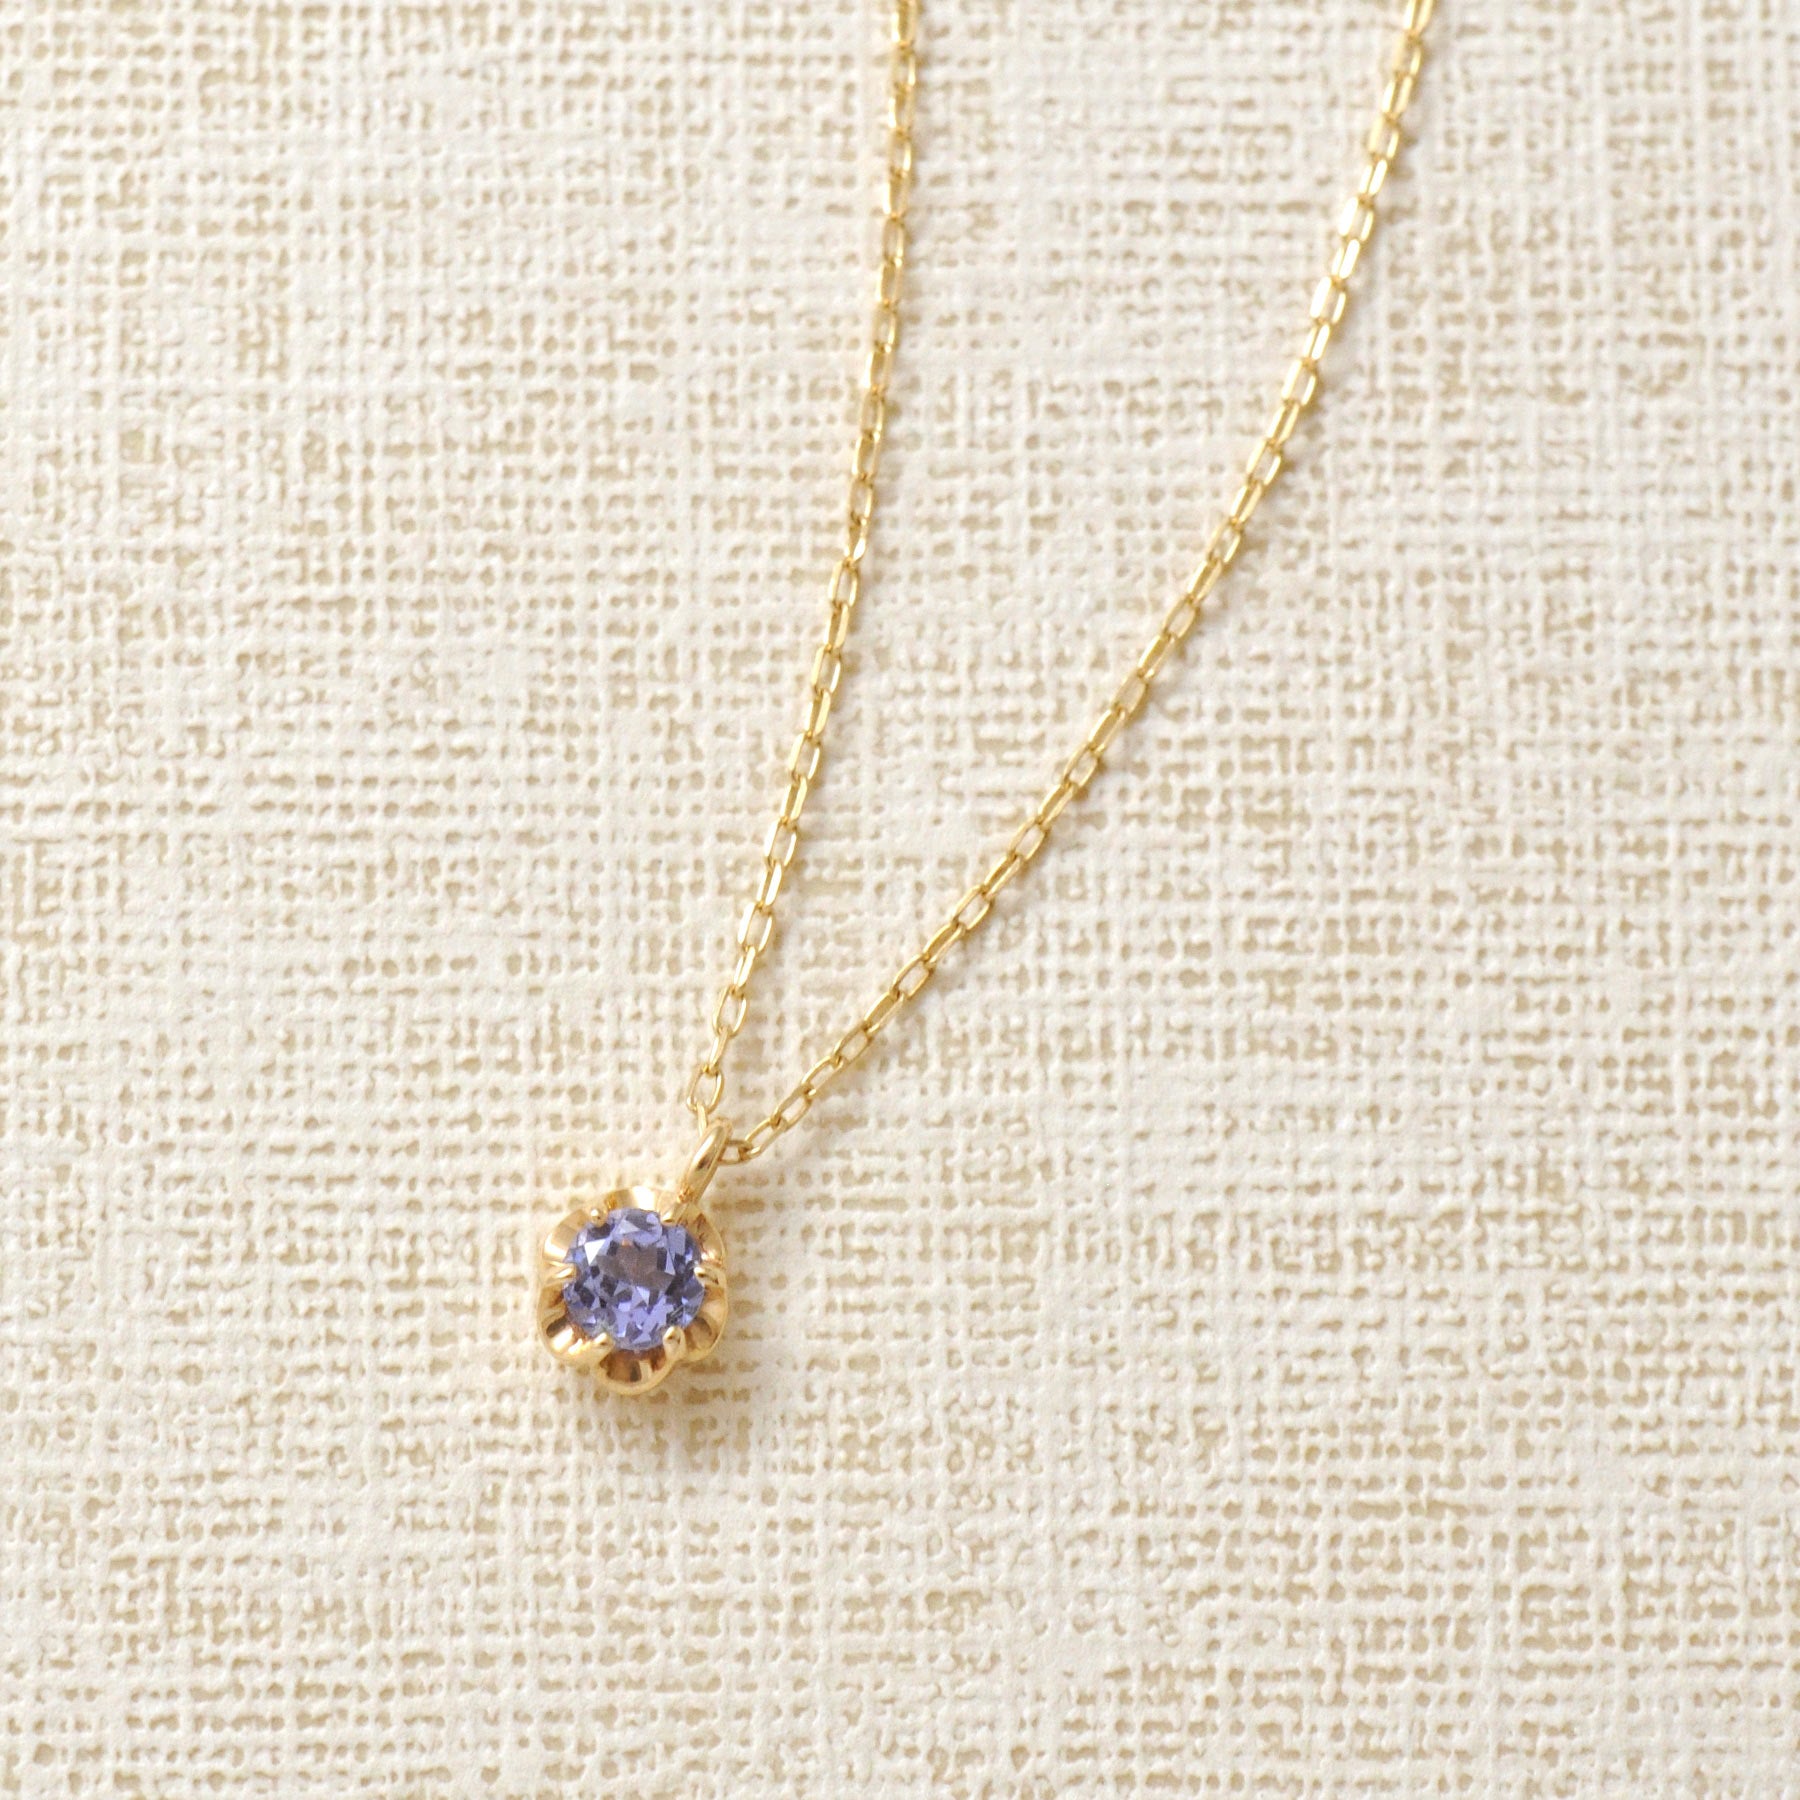 10K Yellow Gold Tanzanite Full Bloom Birthstone Necklace - Product Image